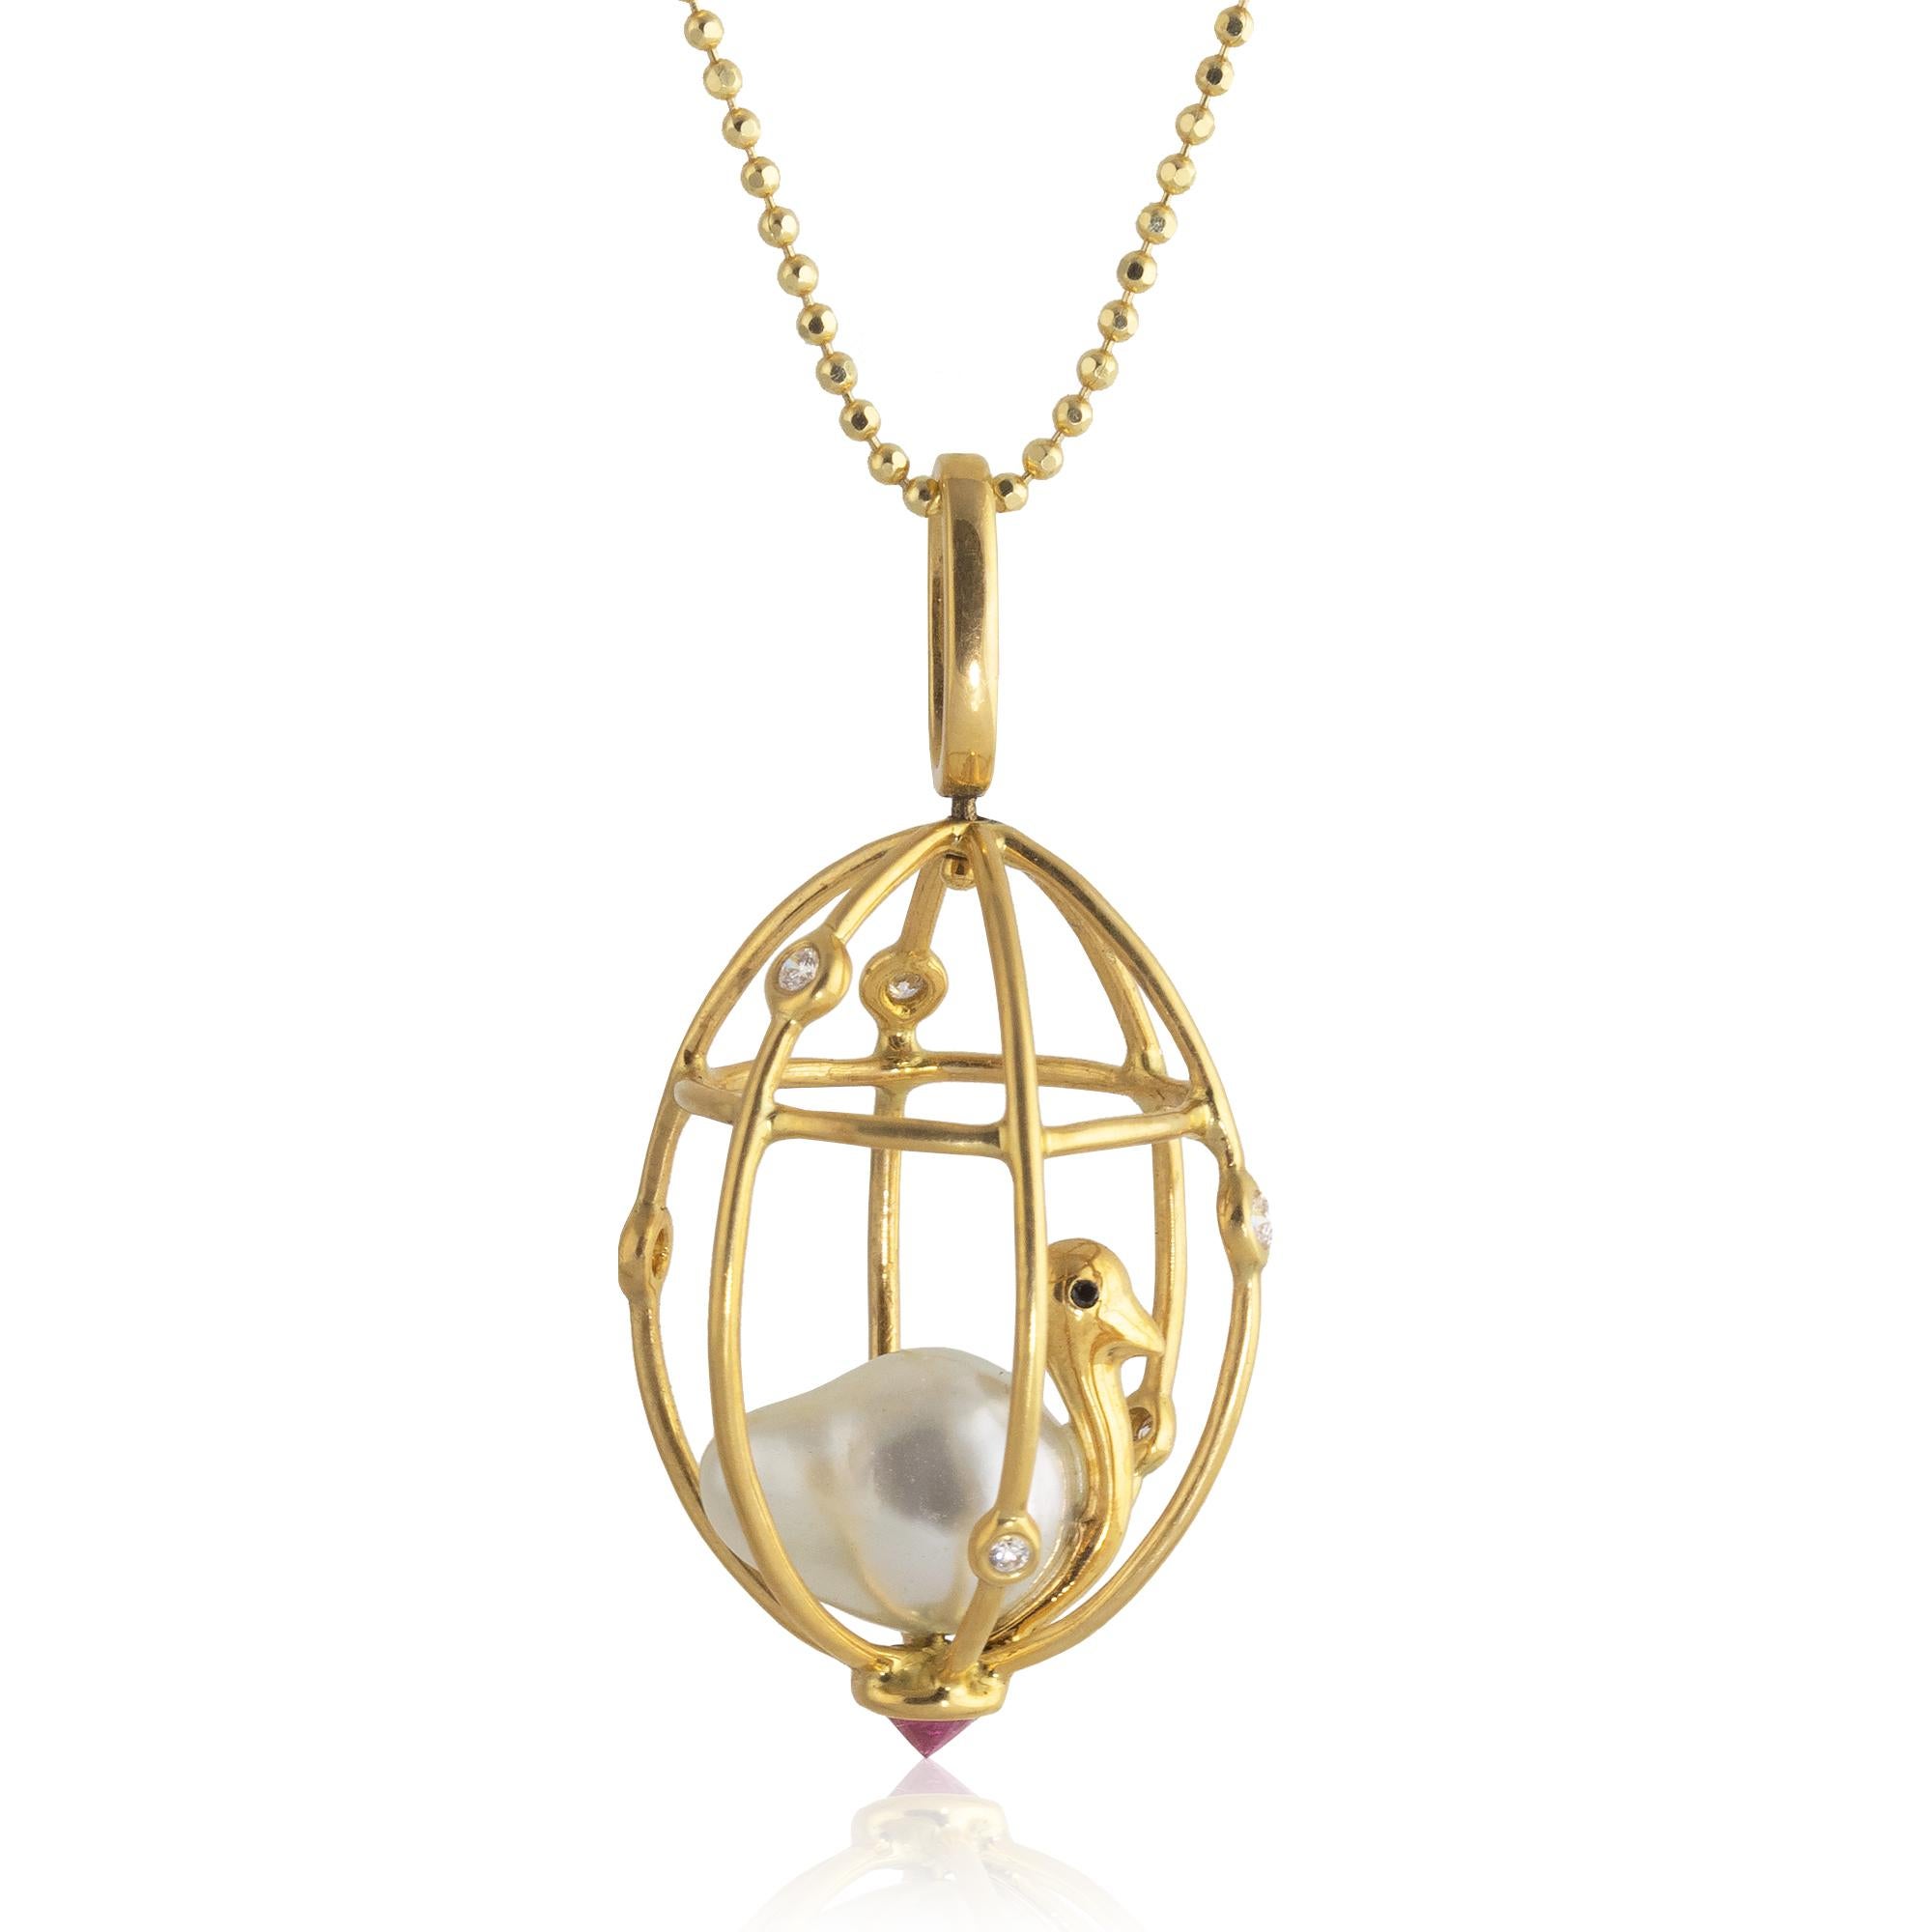 Perched inside this 18k diamond studded cage is a delicate bird; its body made from a 12mm x 9mm Baroque pearl, black diamond eyes decorating its golden body. The pendant features a reverse set .30 carat ruby at the bottom of the cage and swirls in